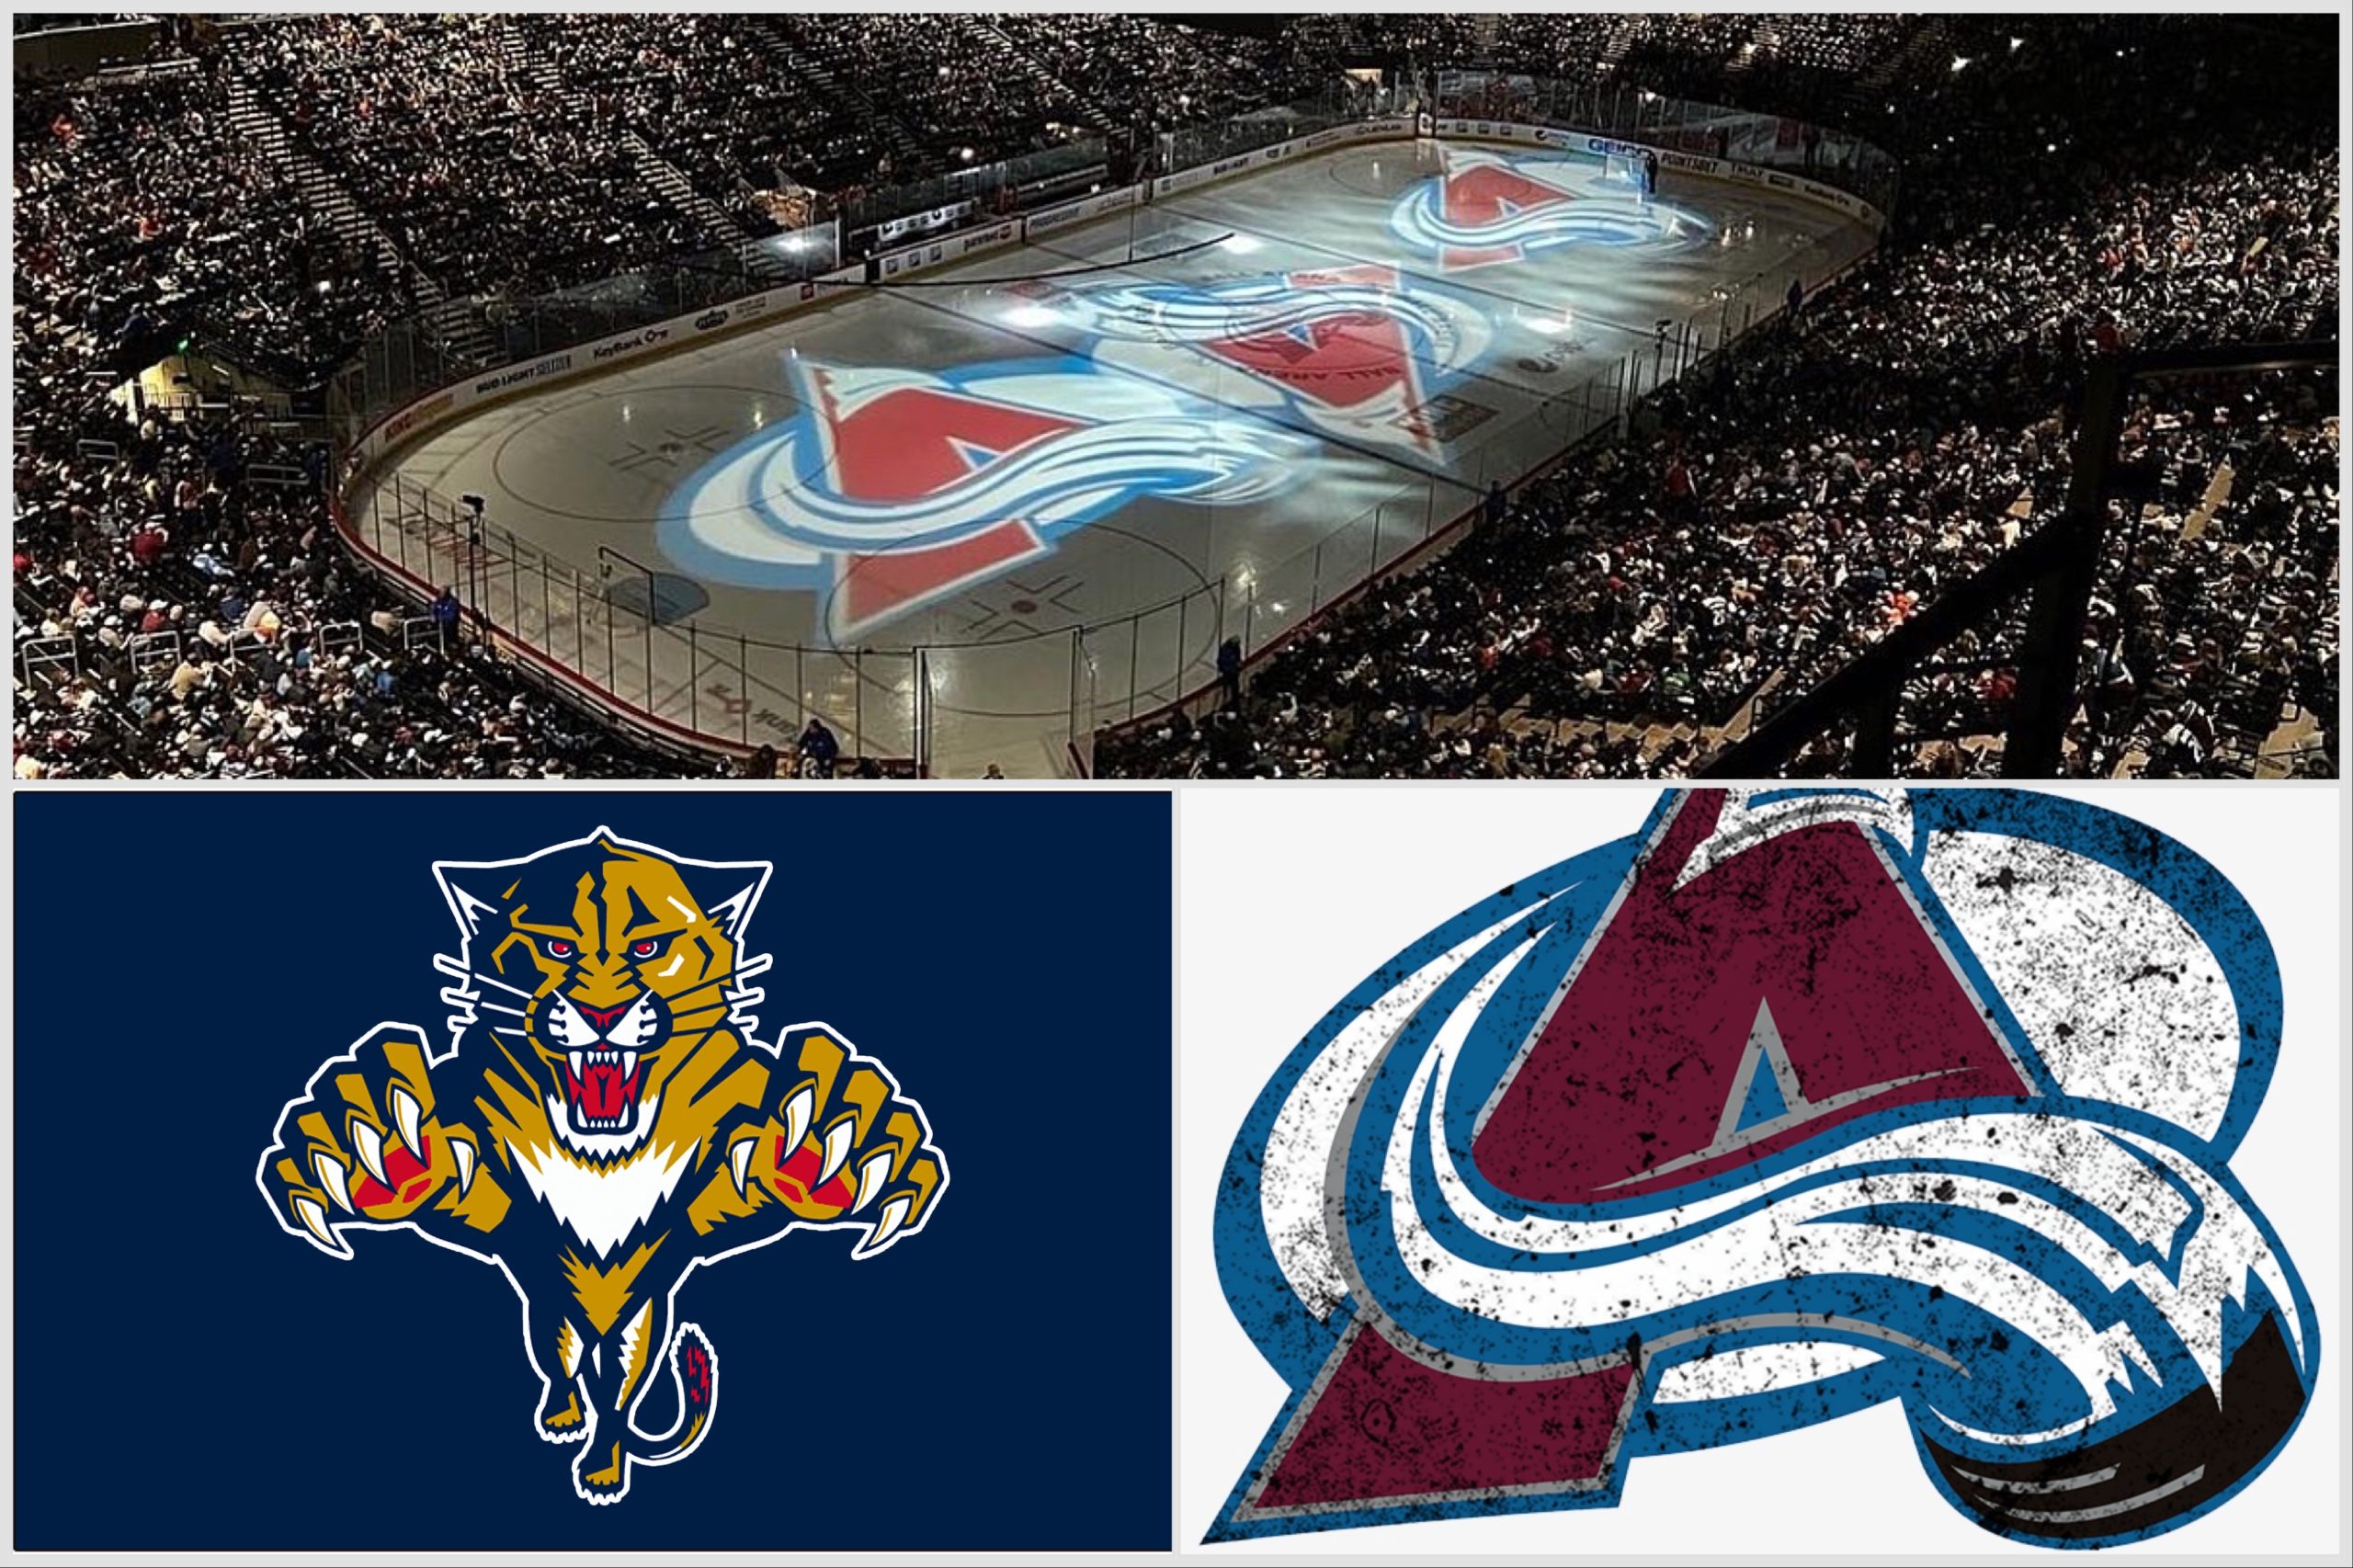 Florida panthers avalanche